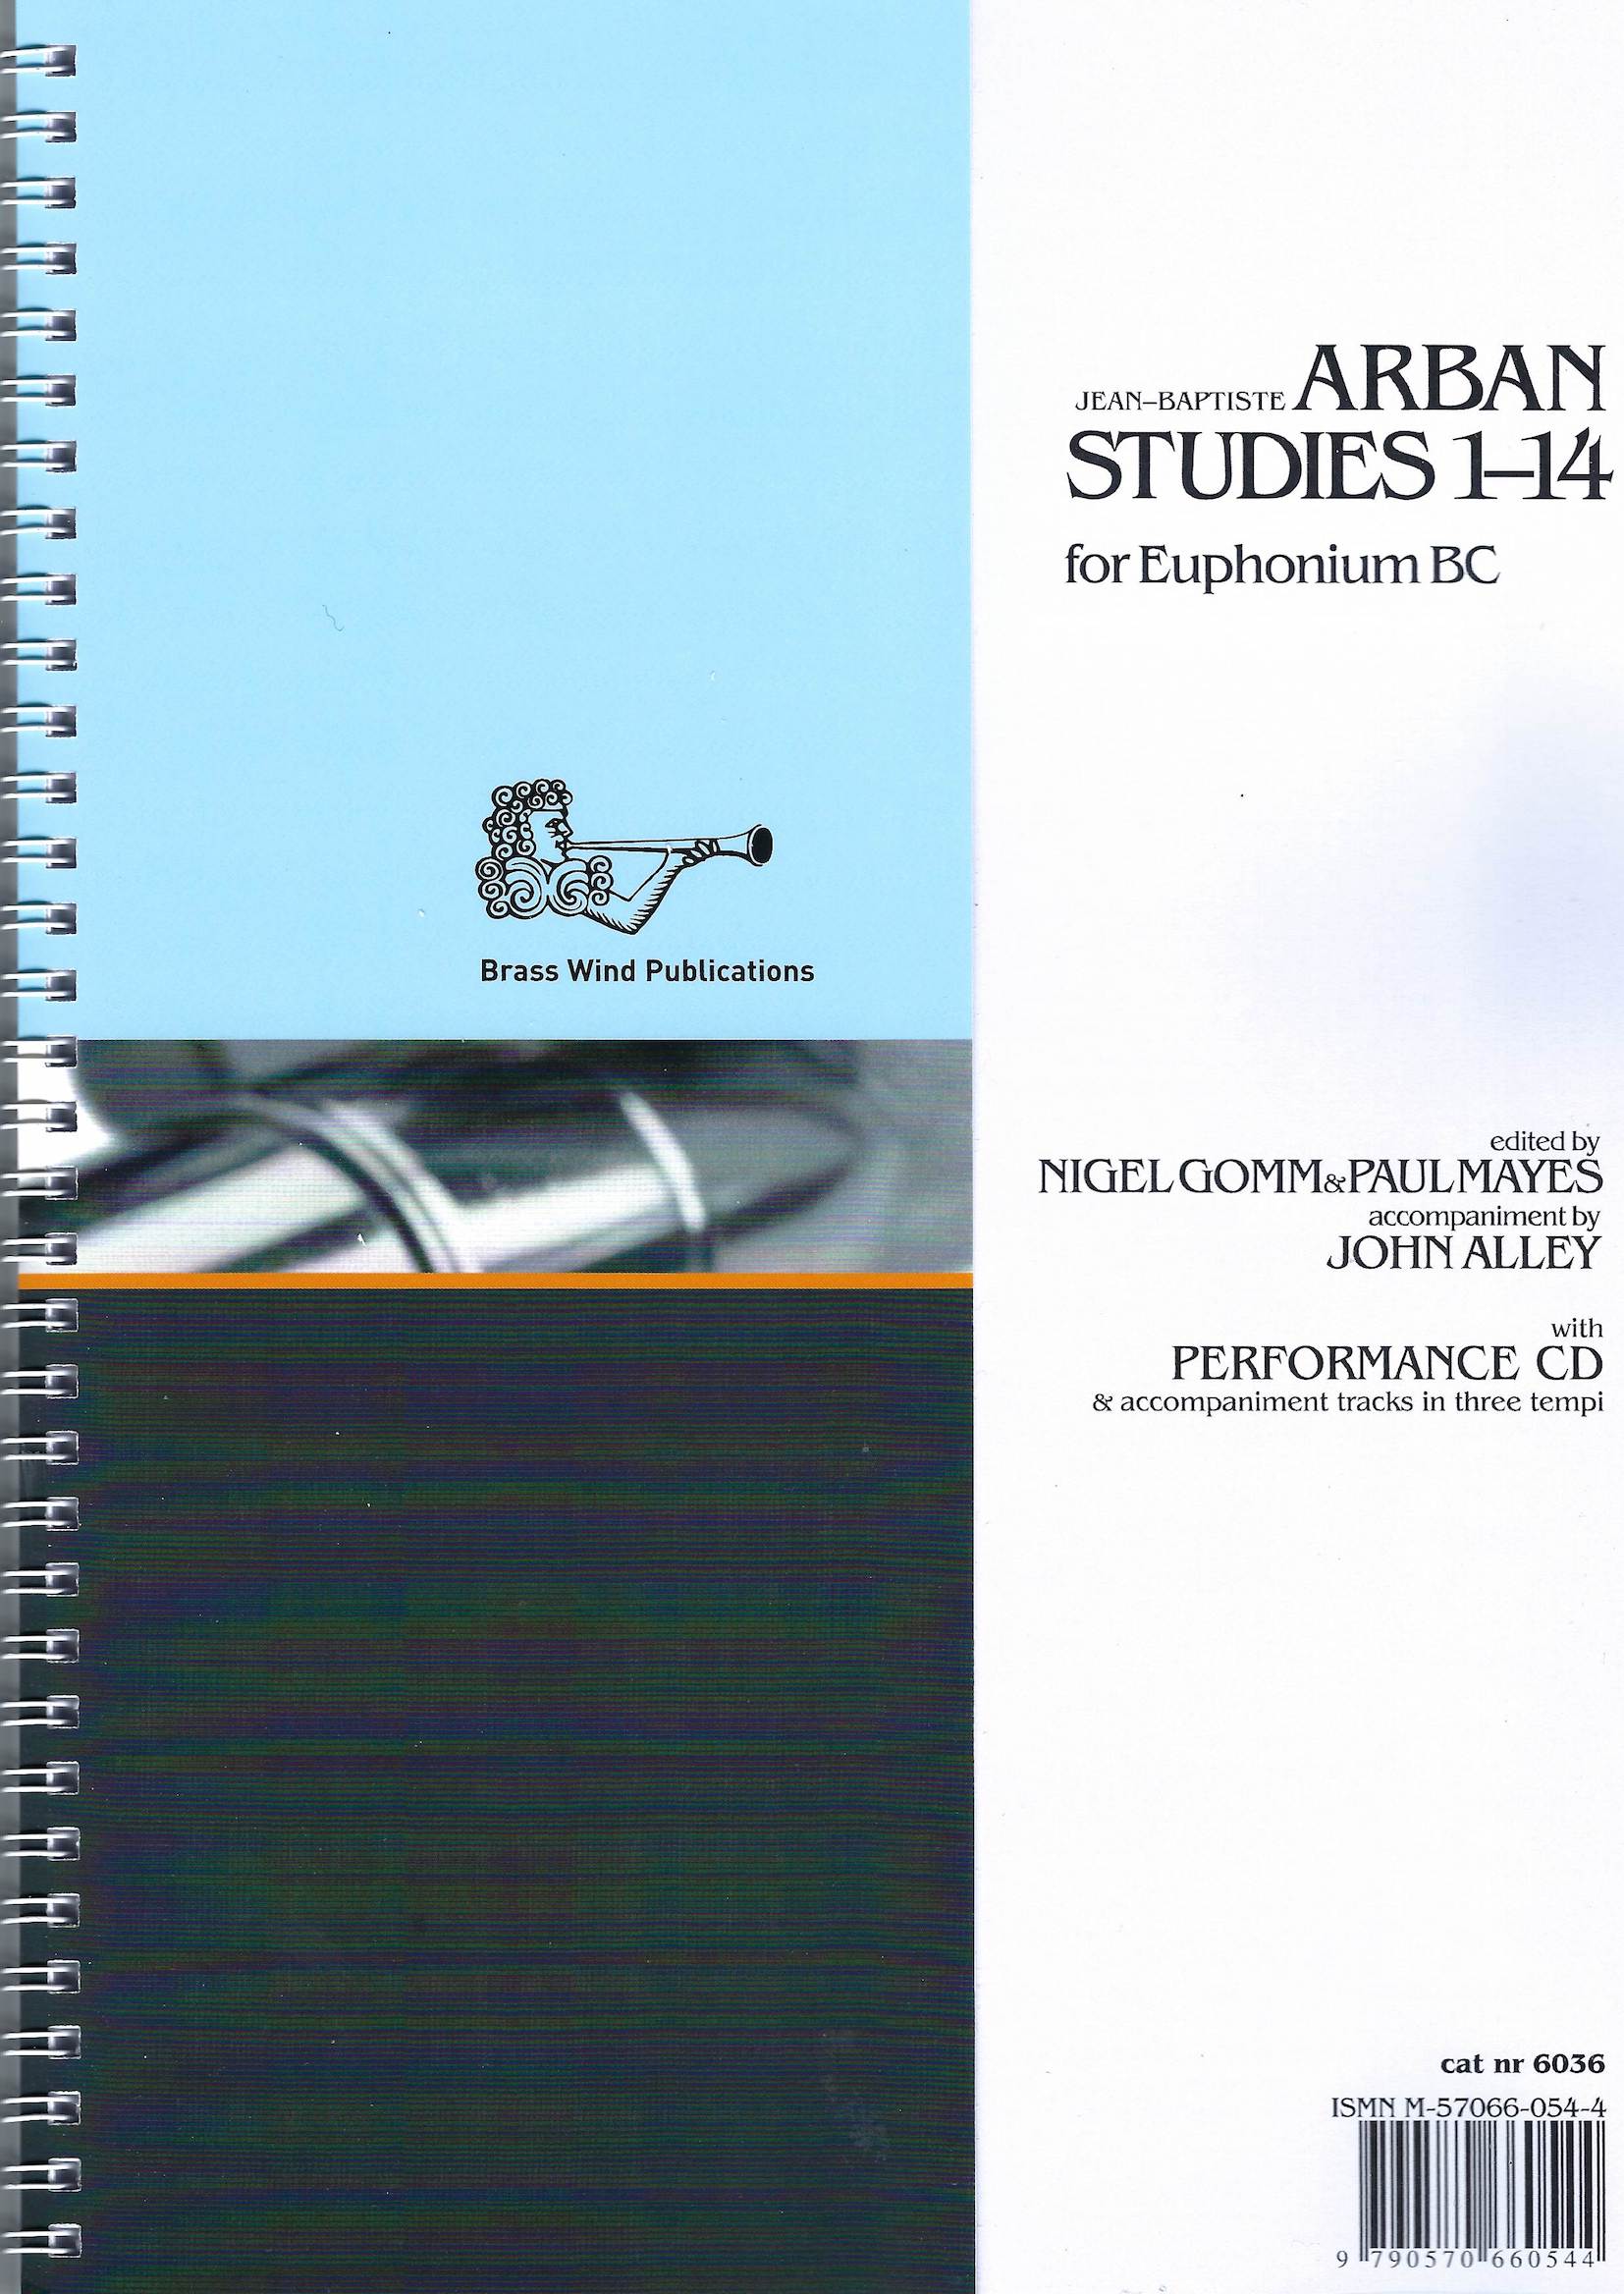 Arban Studies 1-14 - Ed. Gomm and Mayes (solo part, piano part and 2CDs) Bass Clef version